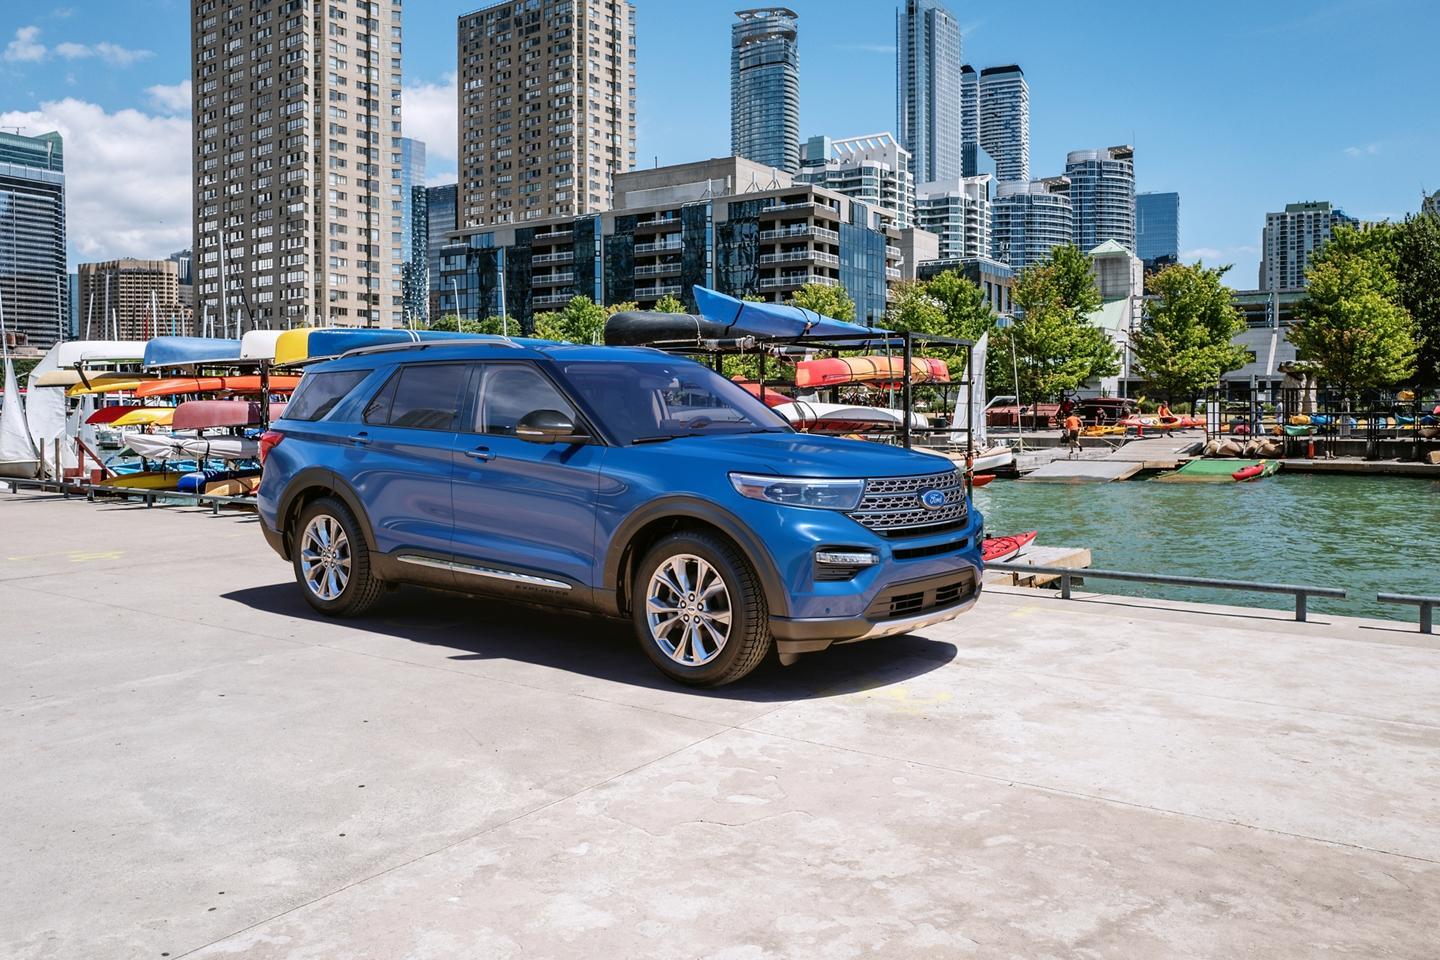  Ford All New Explorer image